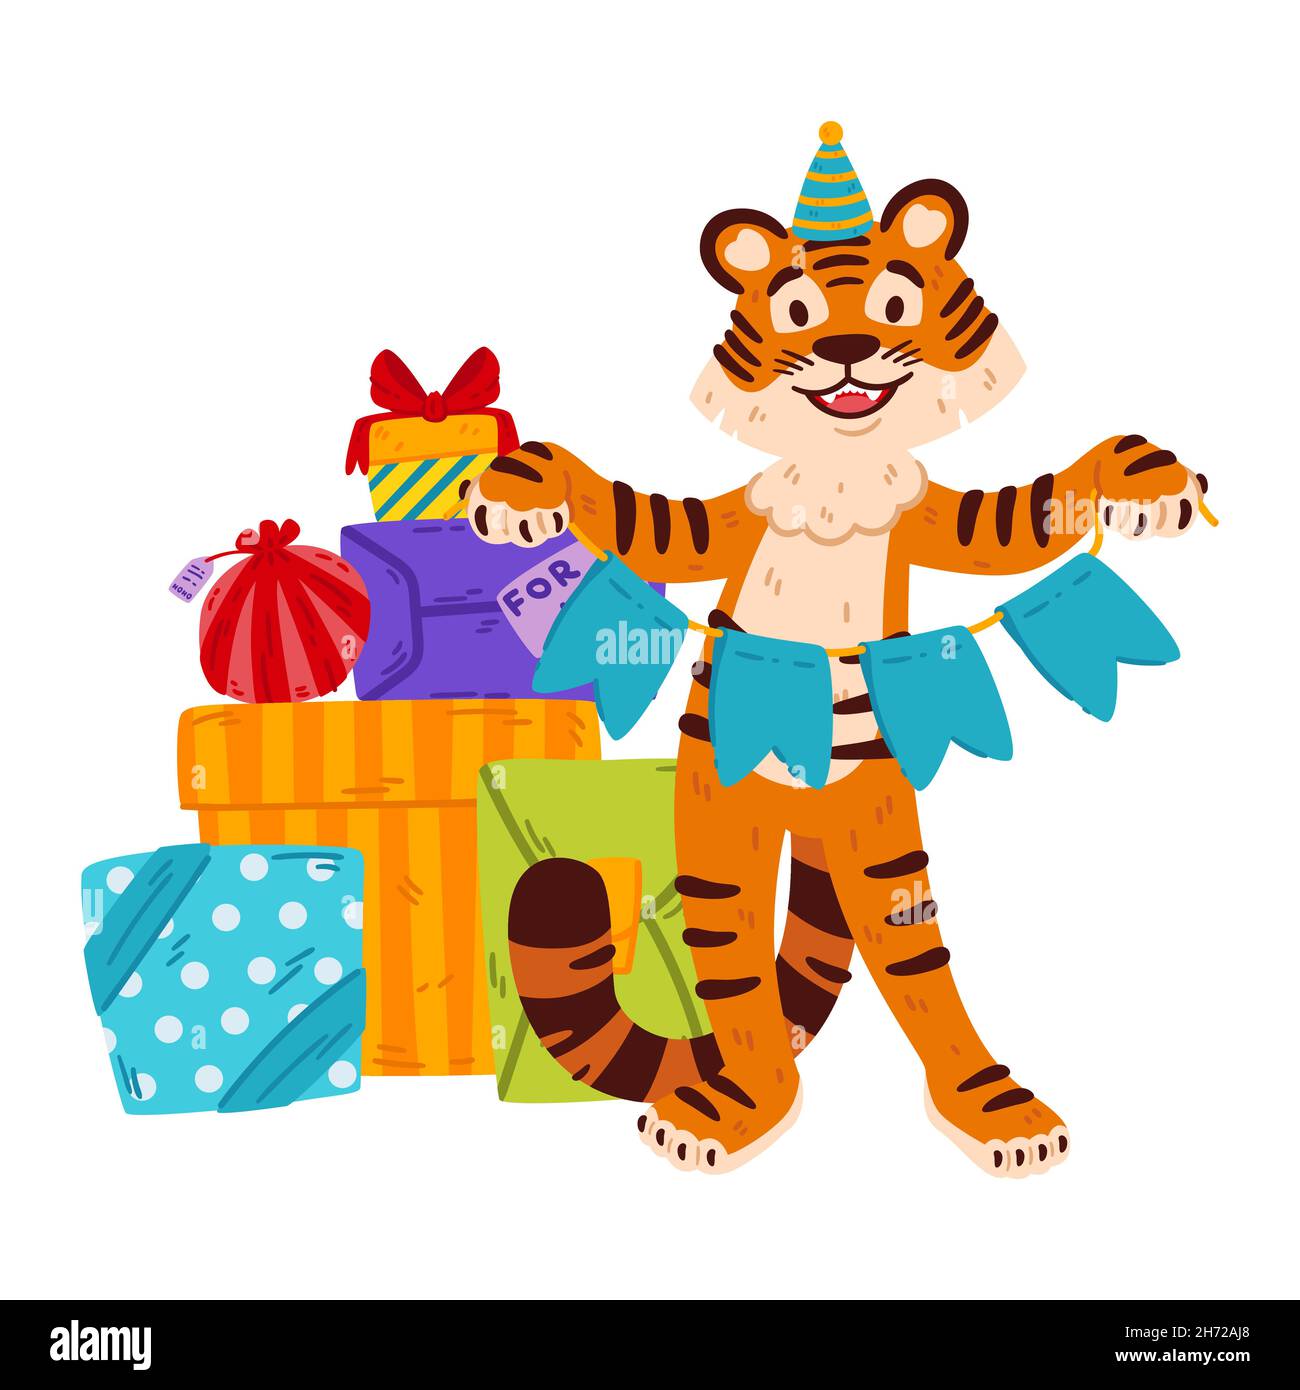 Smiling tiger with party hat, festive garland flags, presents. Chinese zodiac animal. Symbol of the new year 2022, 2034. Vector illustration isolated Stock Vector